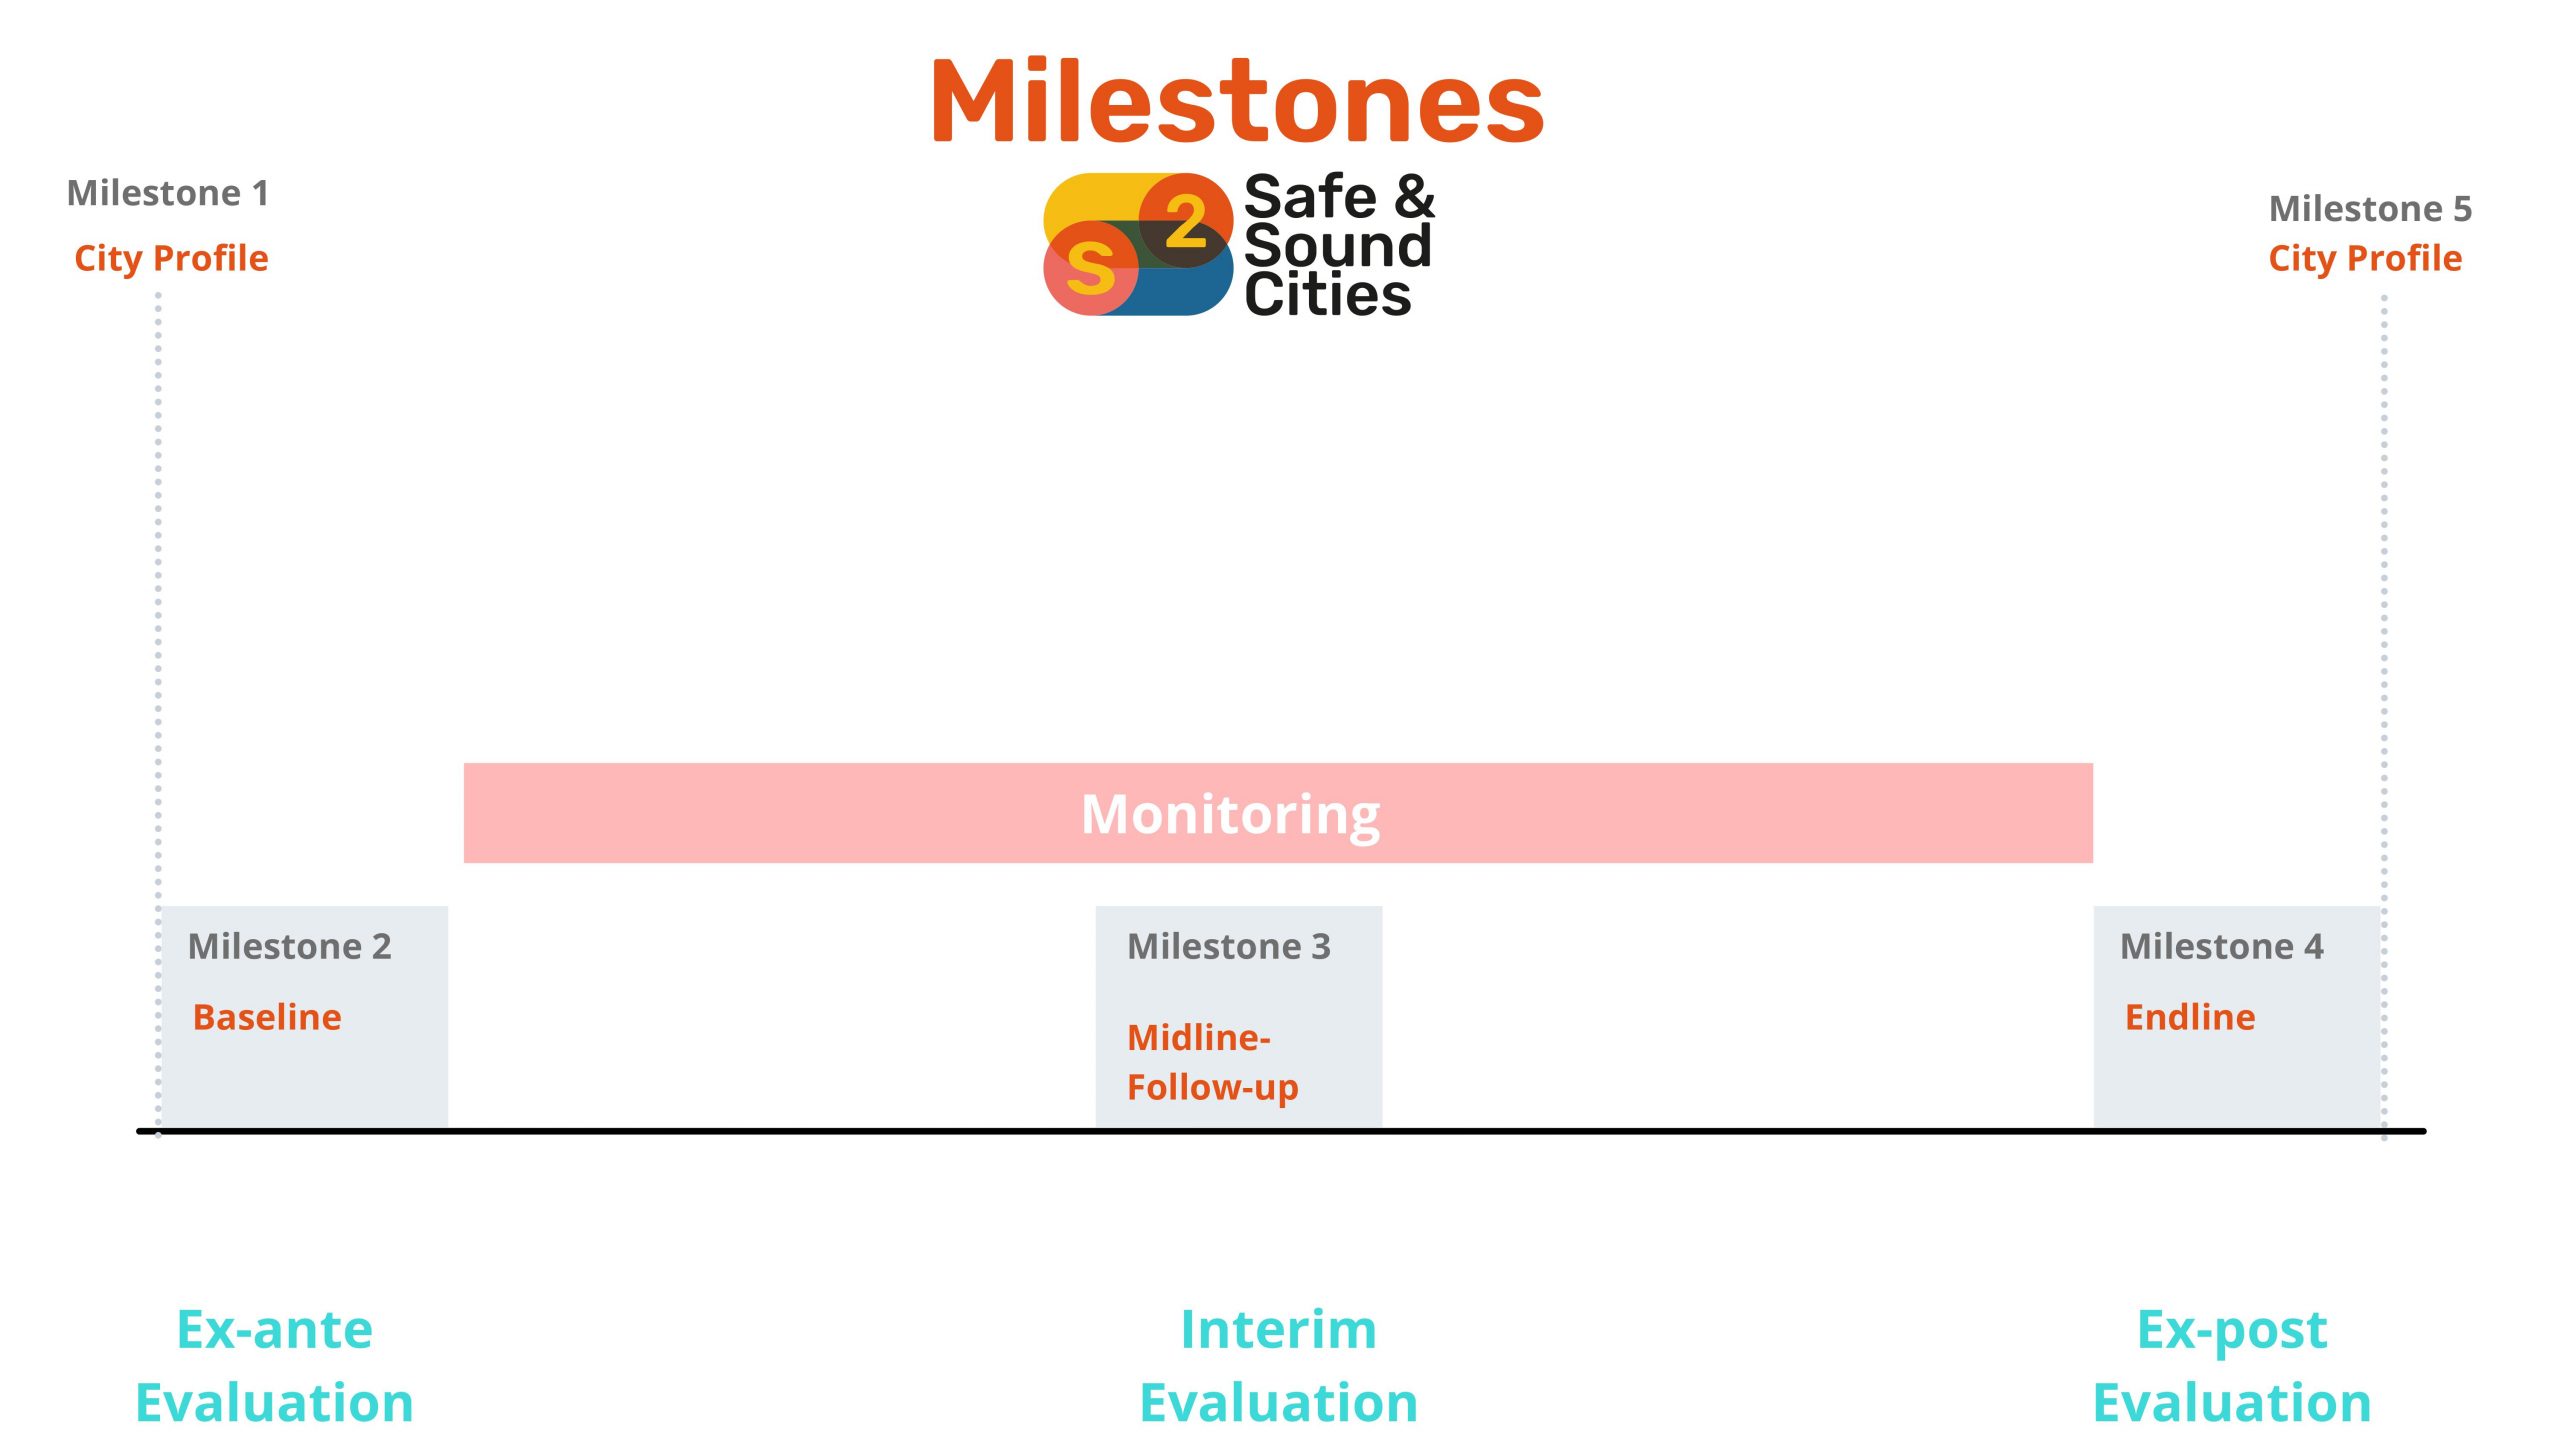 Timeline of iMEL milestones. Milestone 1 (City Profile) and Milestone 2 (Baseline) are recorded at the start of the programme. Milestone 3 is a midline evaluation of program progress. Milestone 4 records the endline indicators and milestone 5 documents the city profile after the programme's completion. The programme is monitored throughout its length for certain indicators.